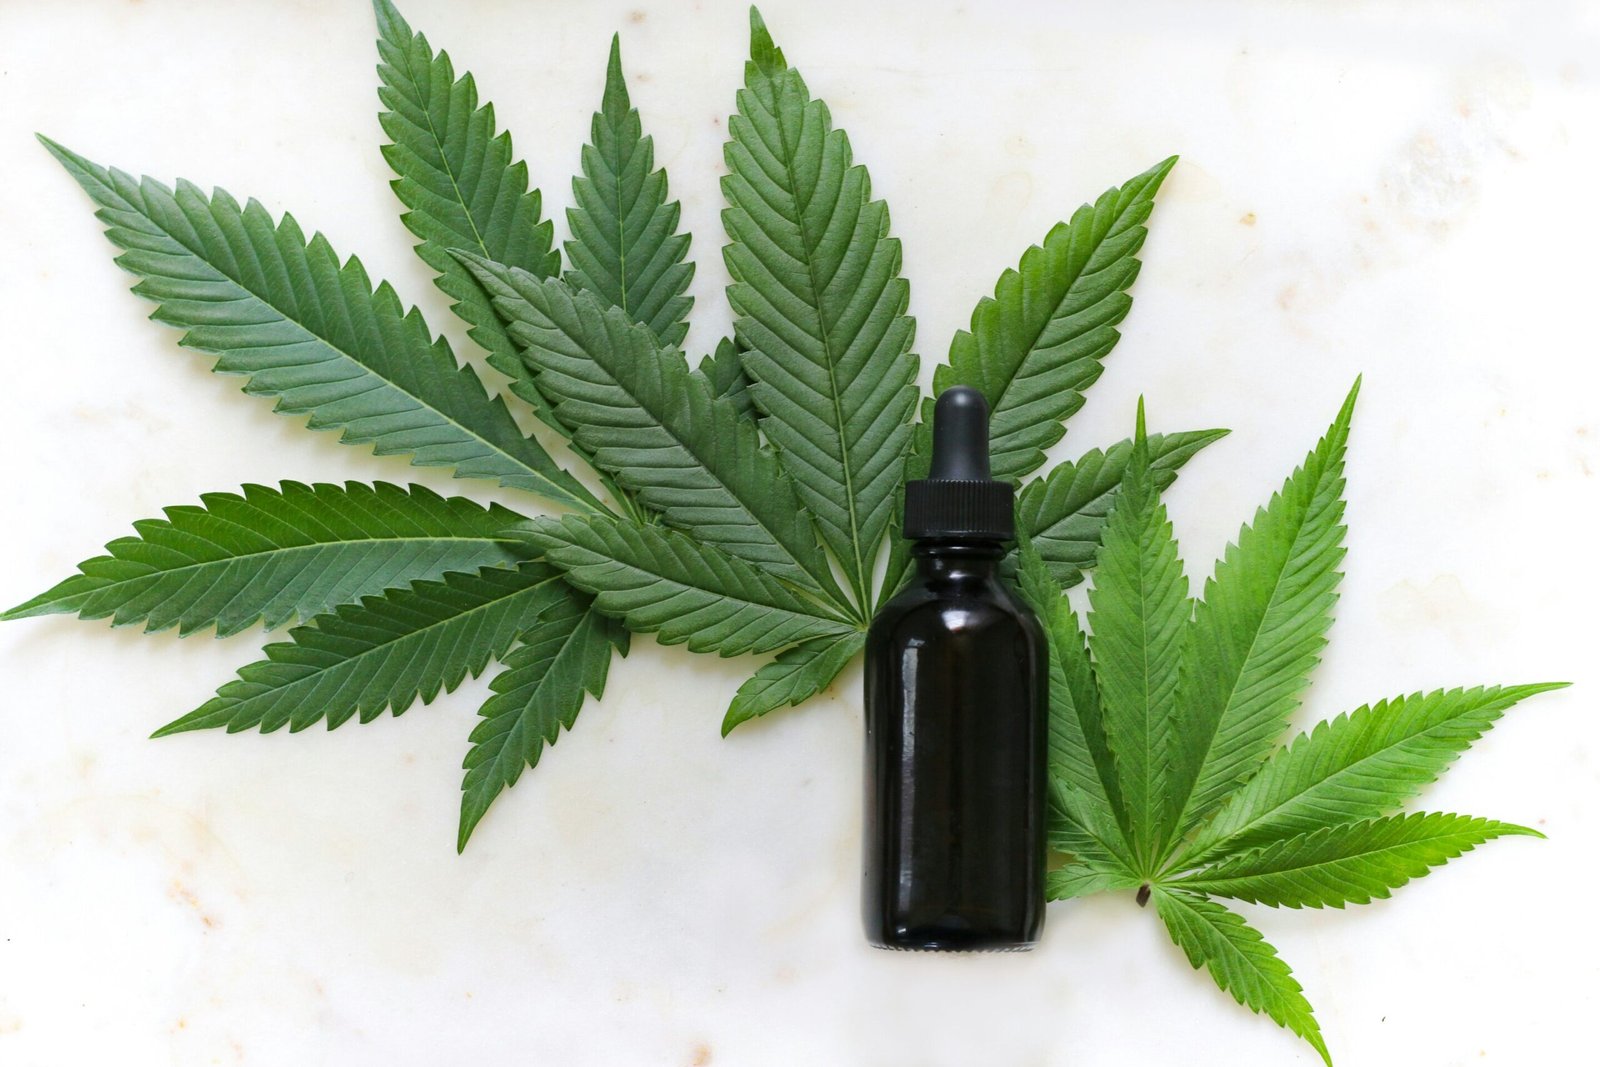 Nearly 3% of healthy adolescents use commercial CBD products, study finds